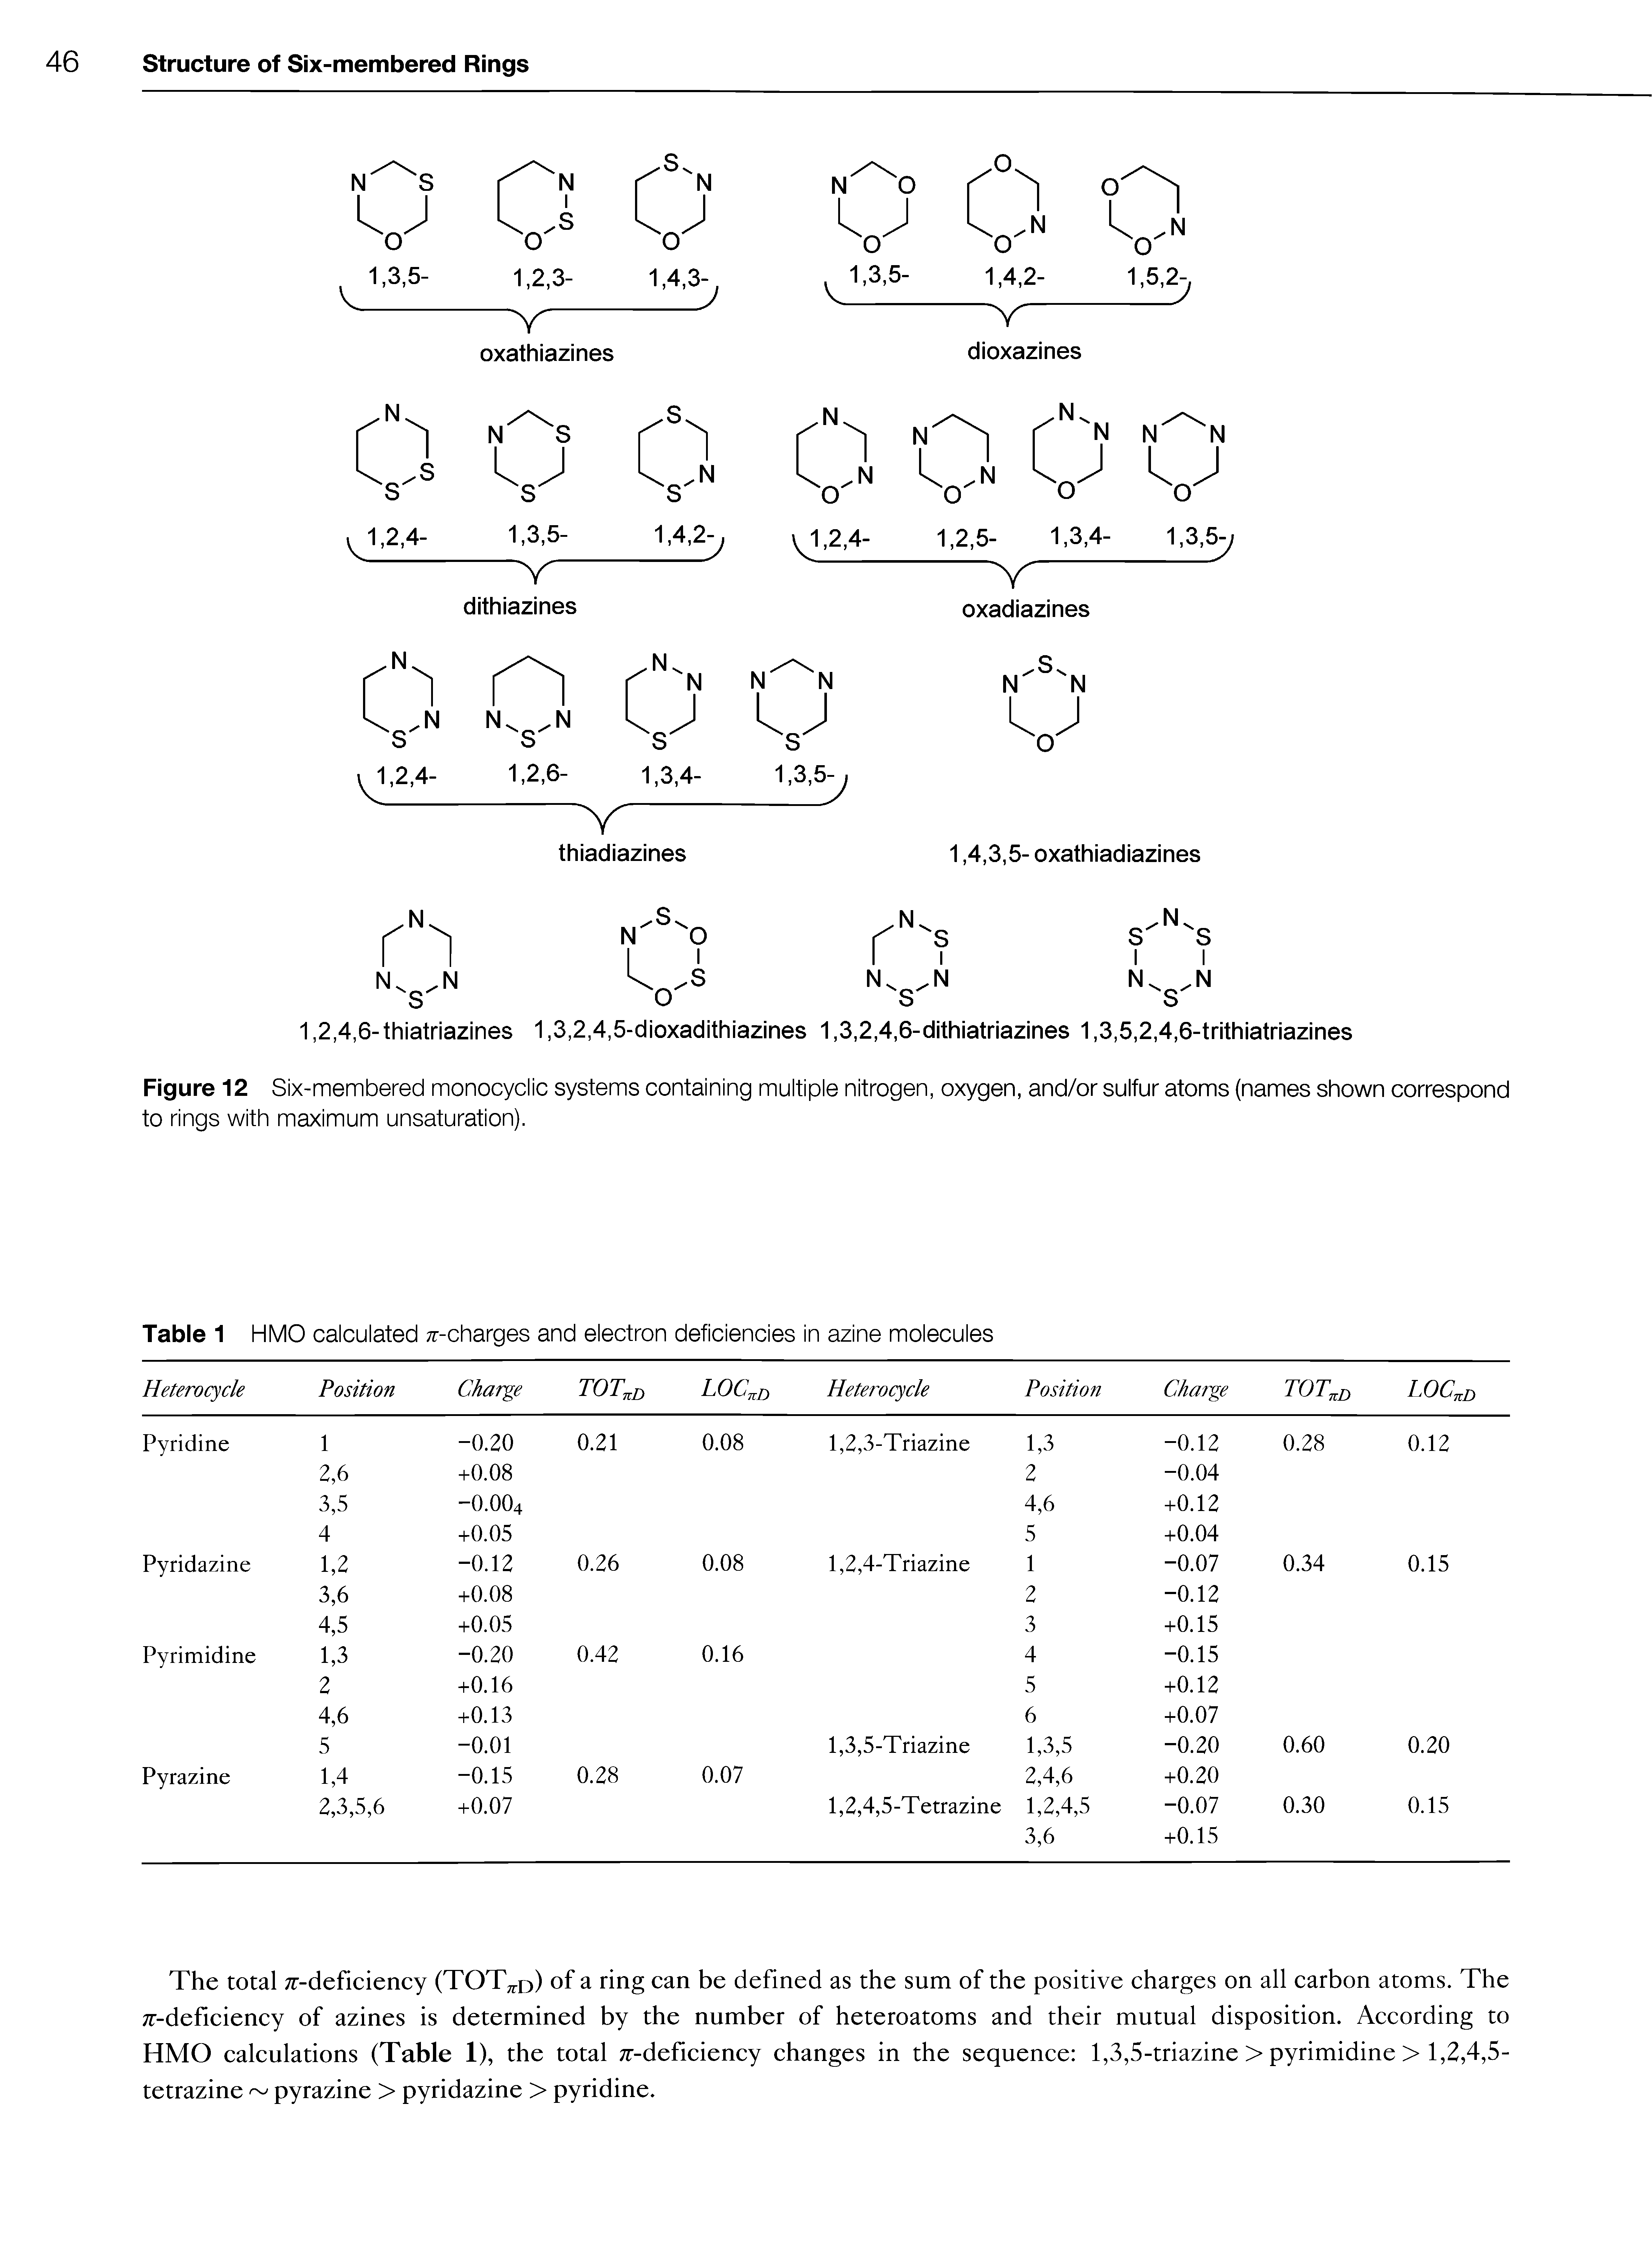 Figure 12 Six-membered monocyclic systems containing multiple nitrogen, oxygen, and/or sulfur atoms (names shown correspond to rings with maximum unsaturation).